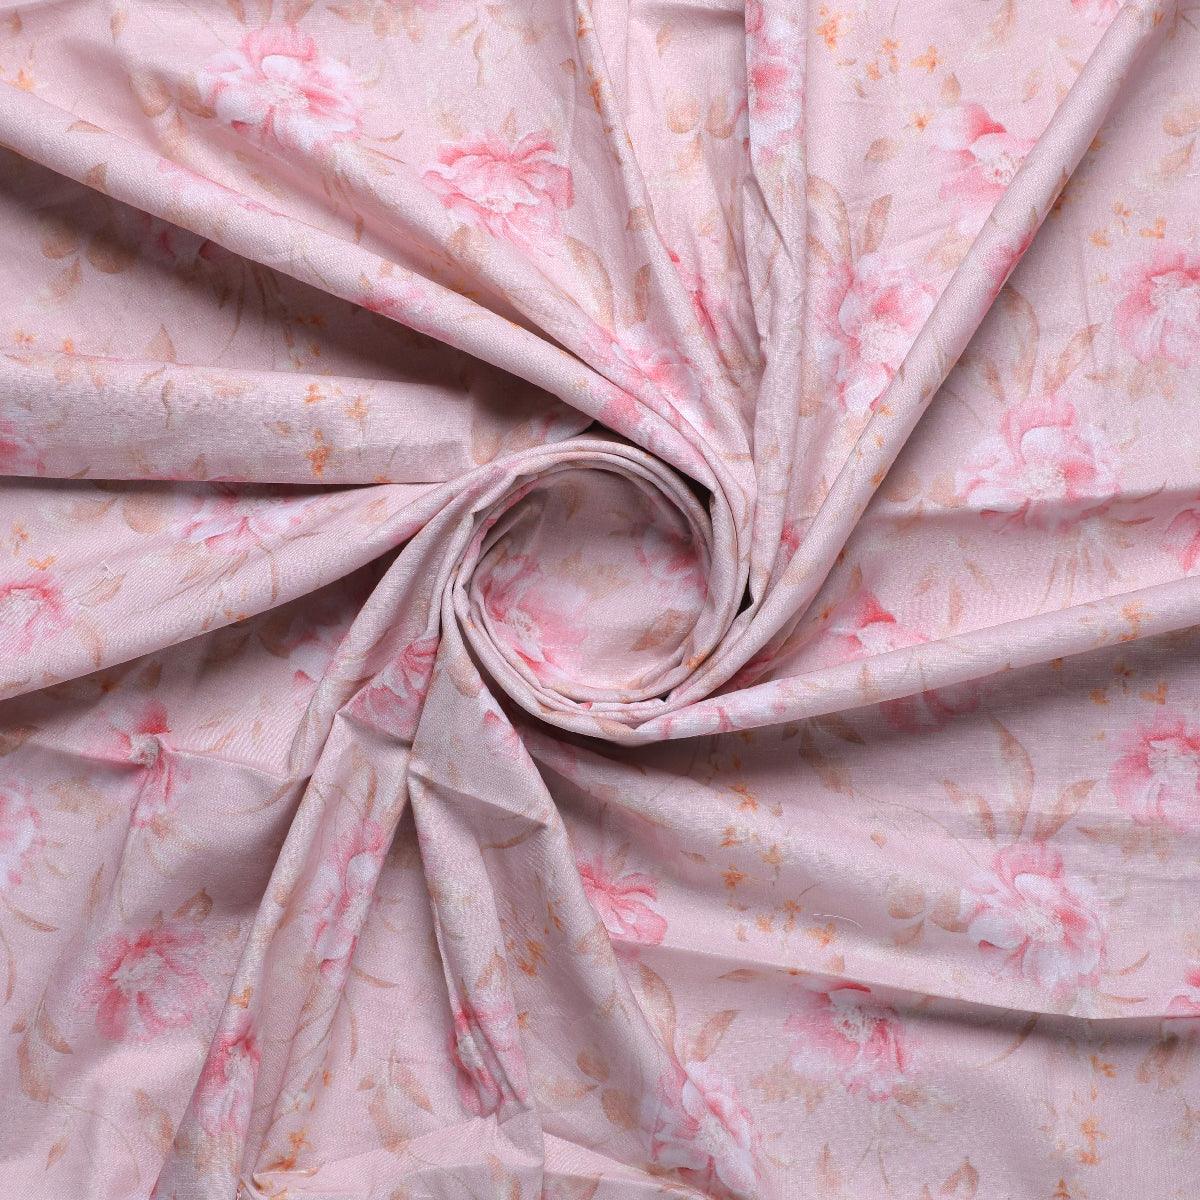 Pure Cotton Digital Printed Fabrics in Light Pink and Floral Leaves Pattern - FAB VOGUE Studio®